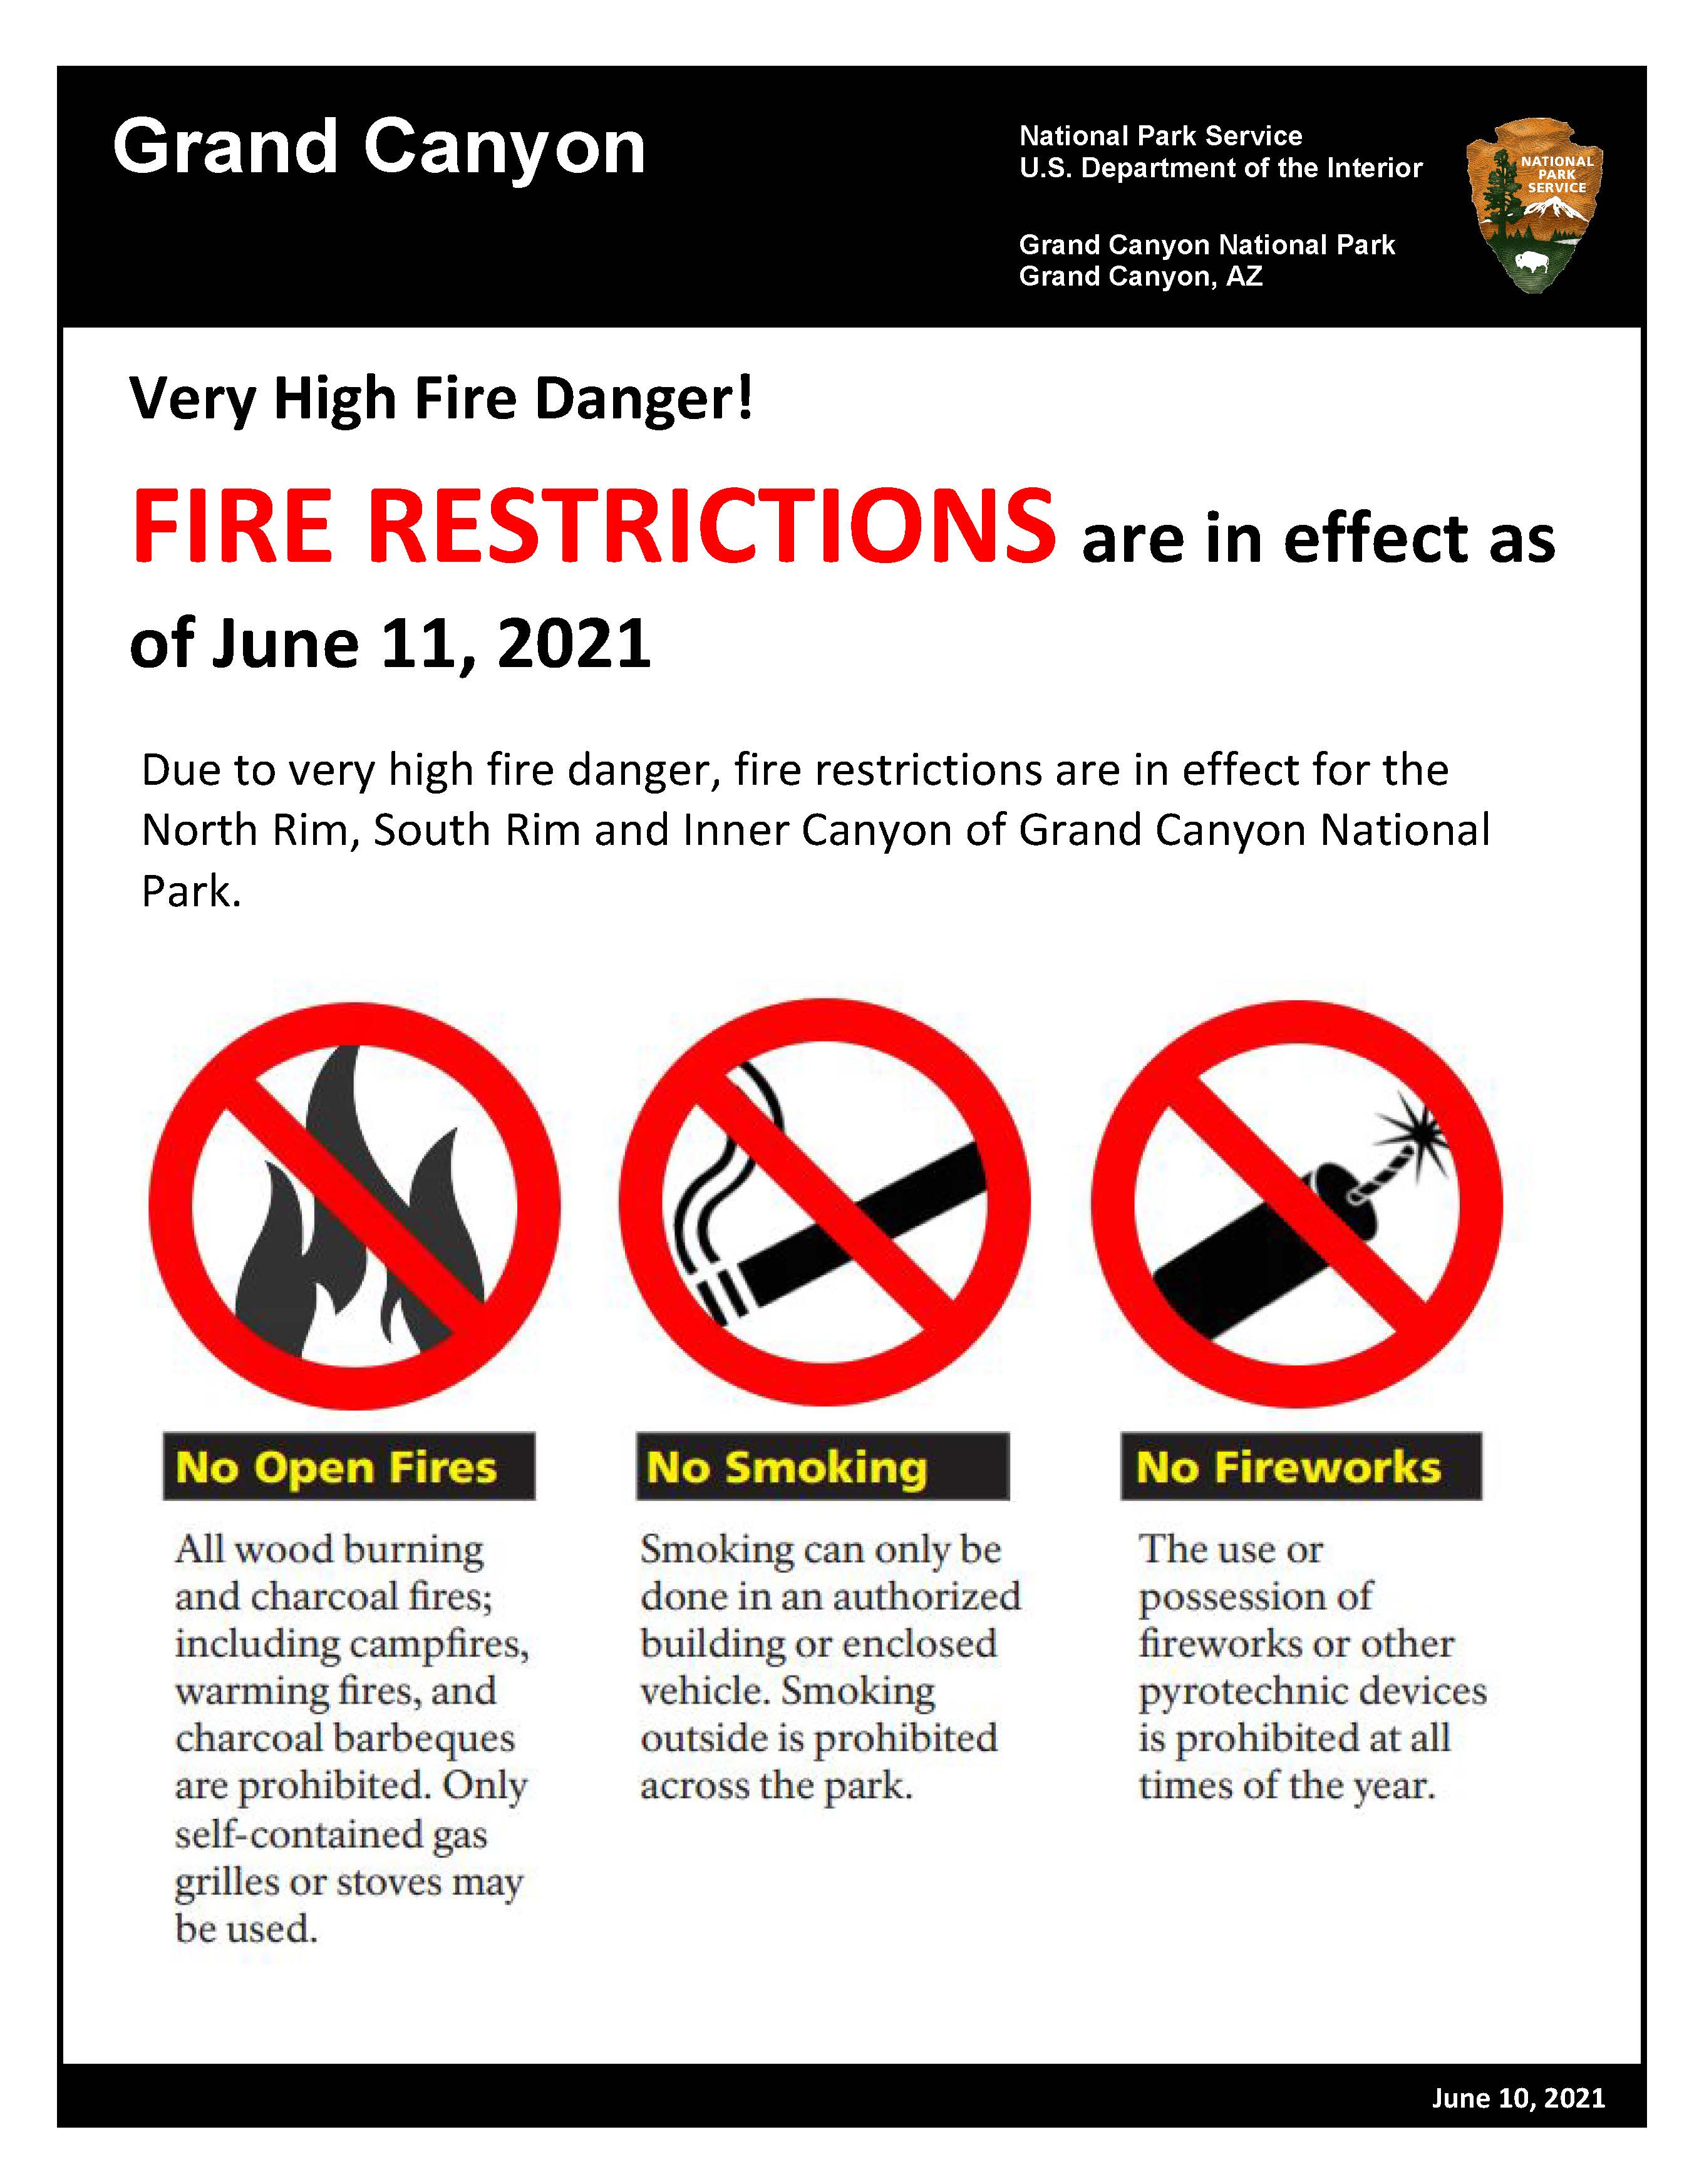 Graphic image with visuals showing no wood burning fires, no smoking, and no fireworks. Fire restrictions are in effect at Grand Canyon beginning June 11, 2021.